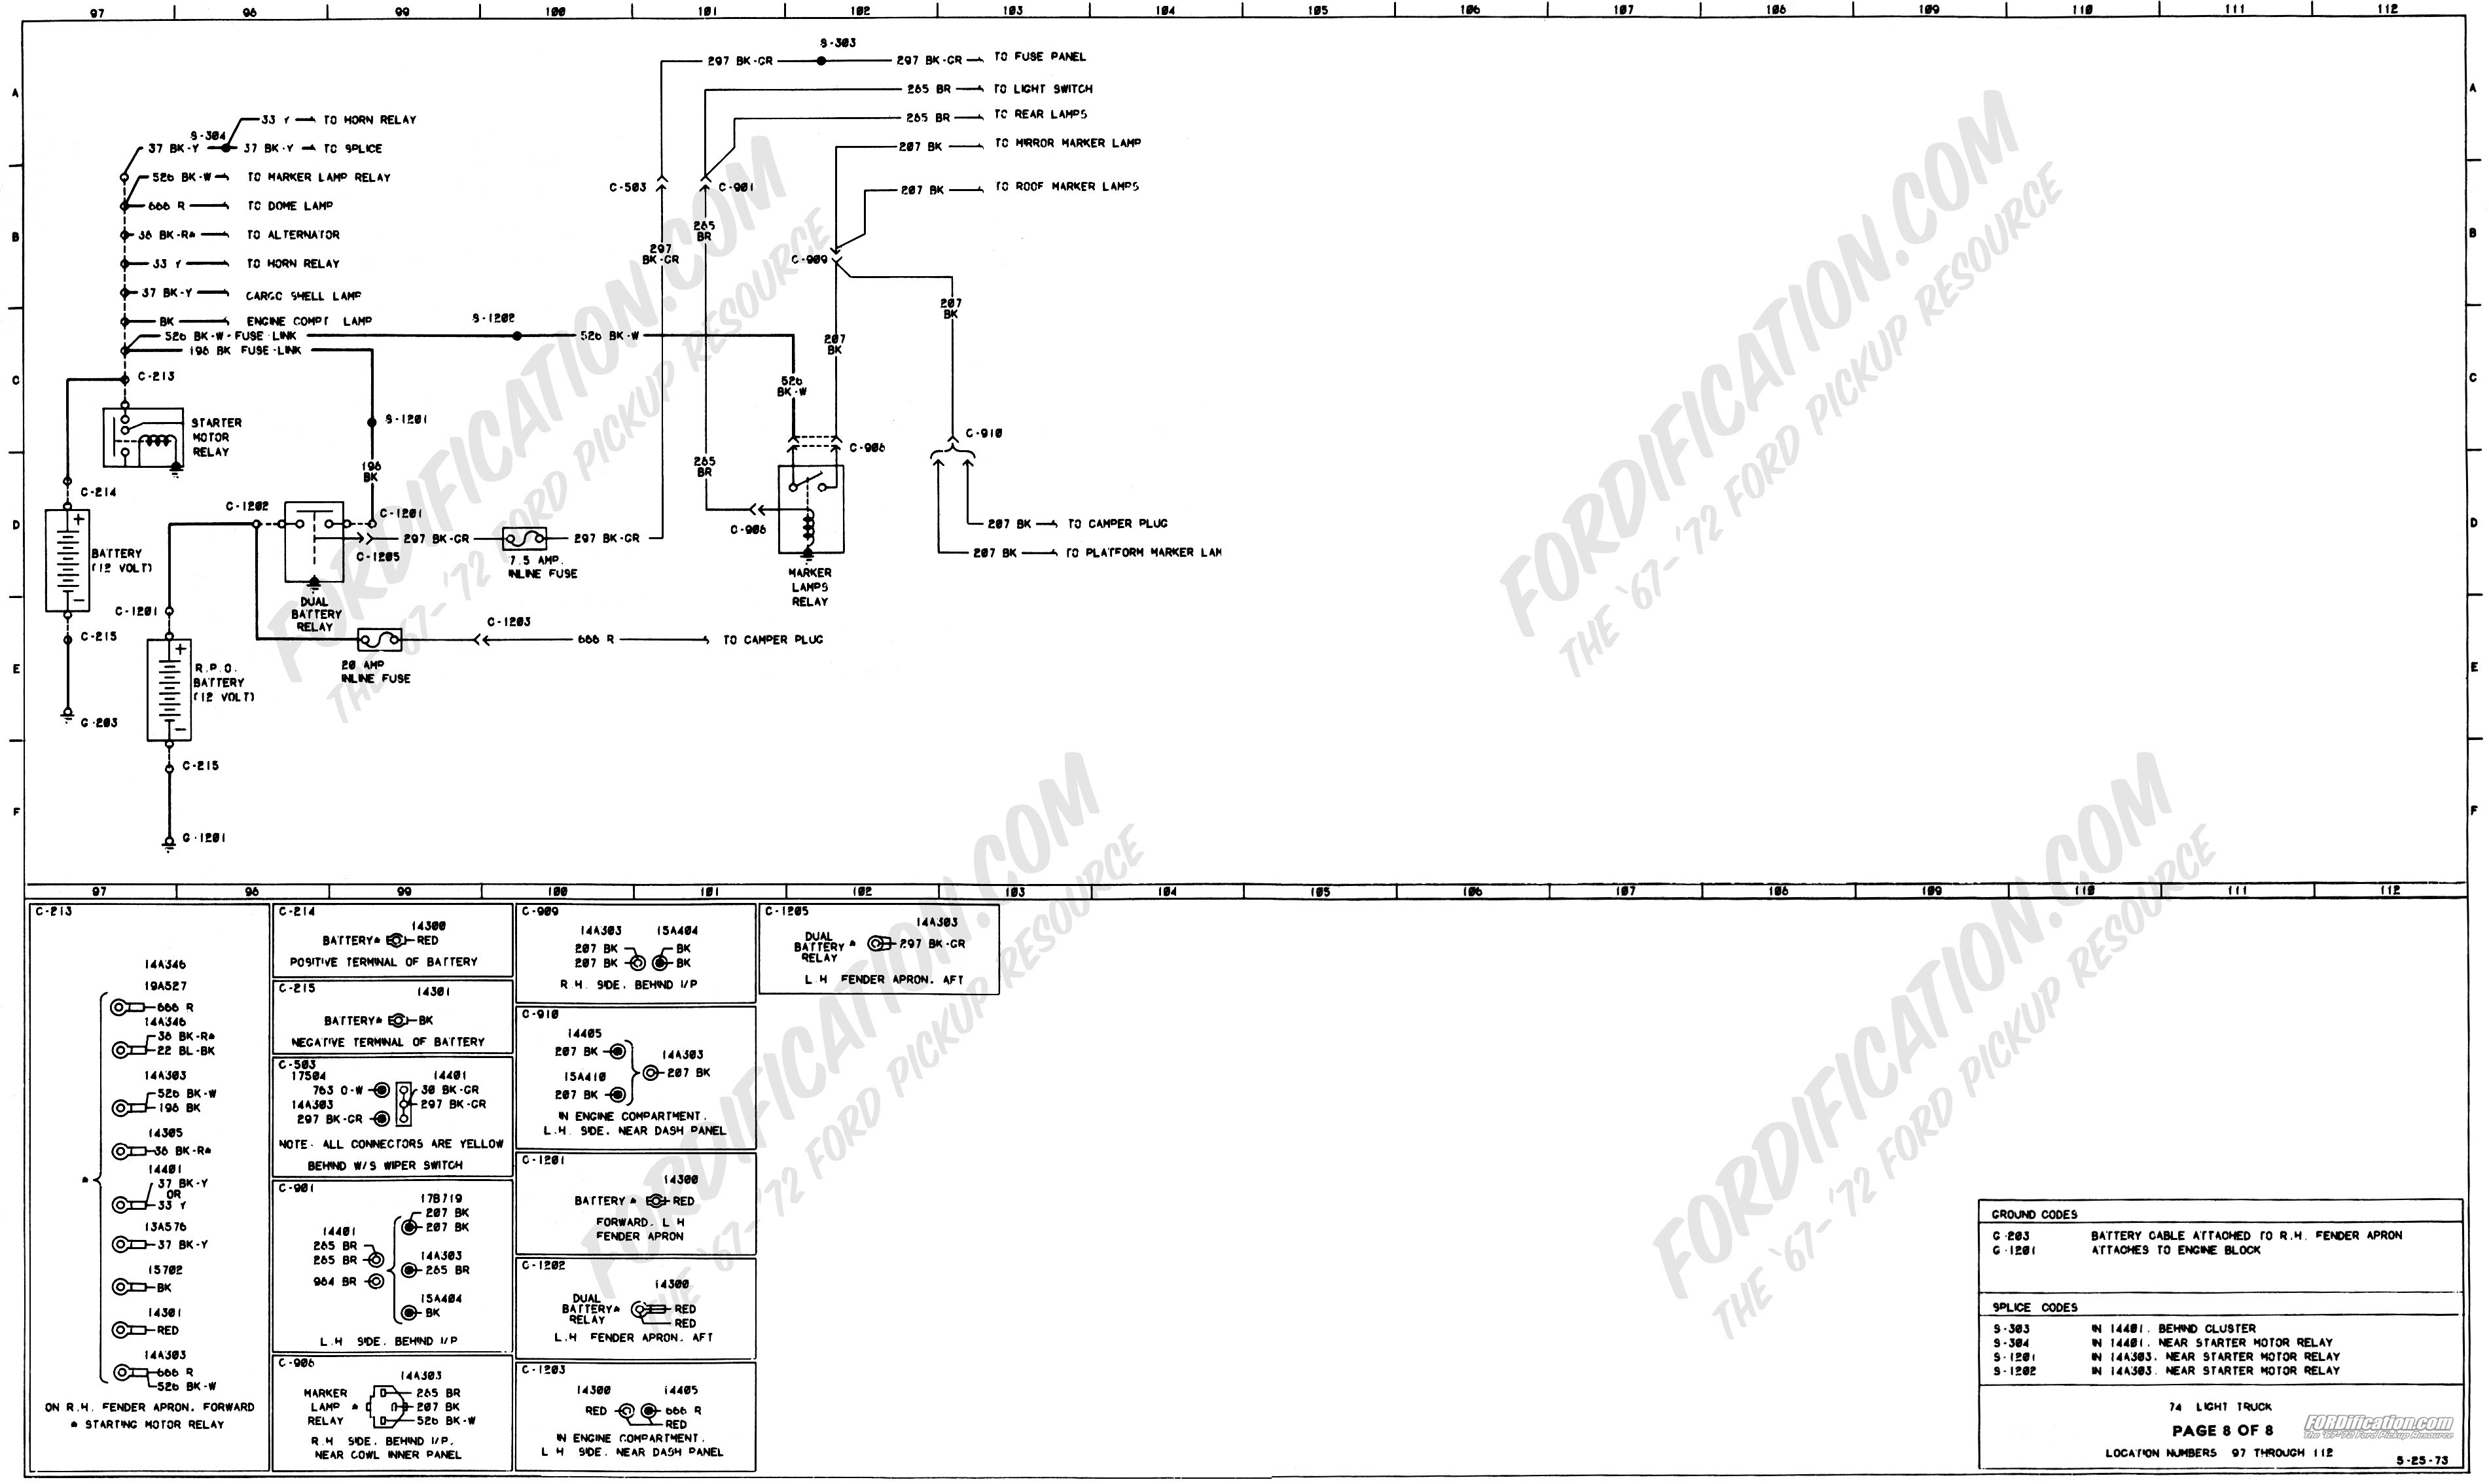 73 Camper Special Wiring Diagram - Have one to share? - Ford Truck